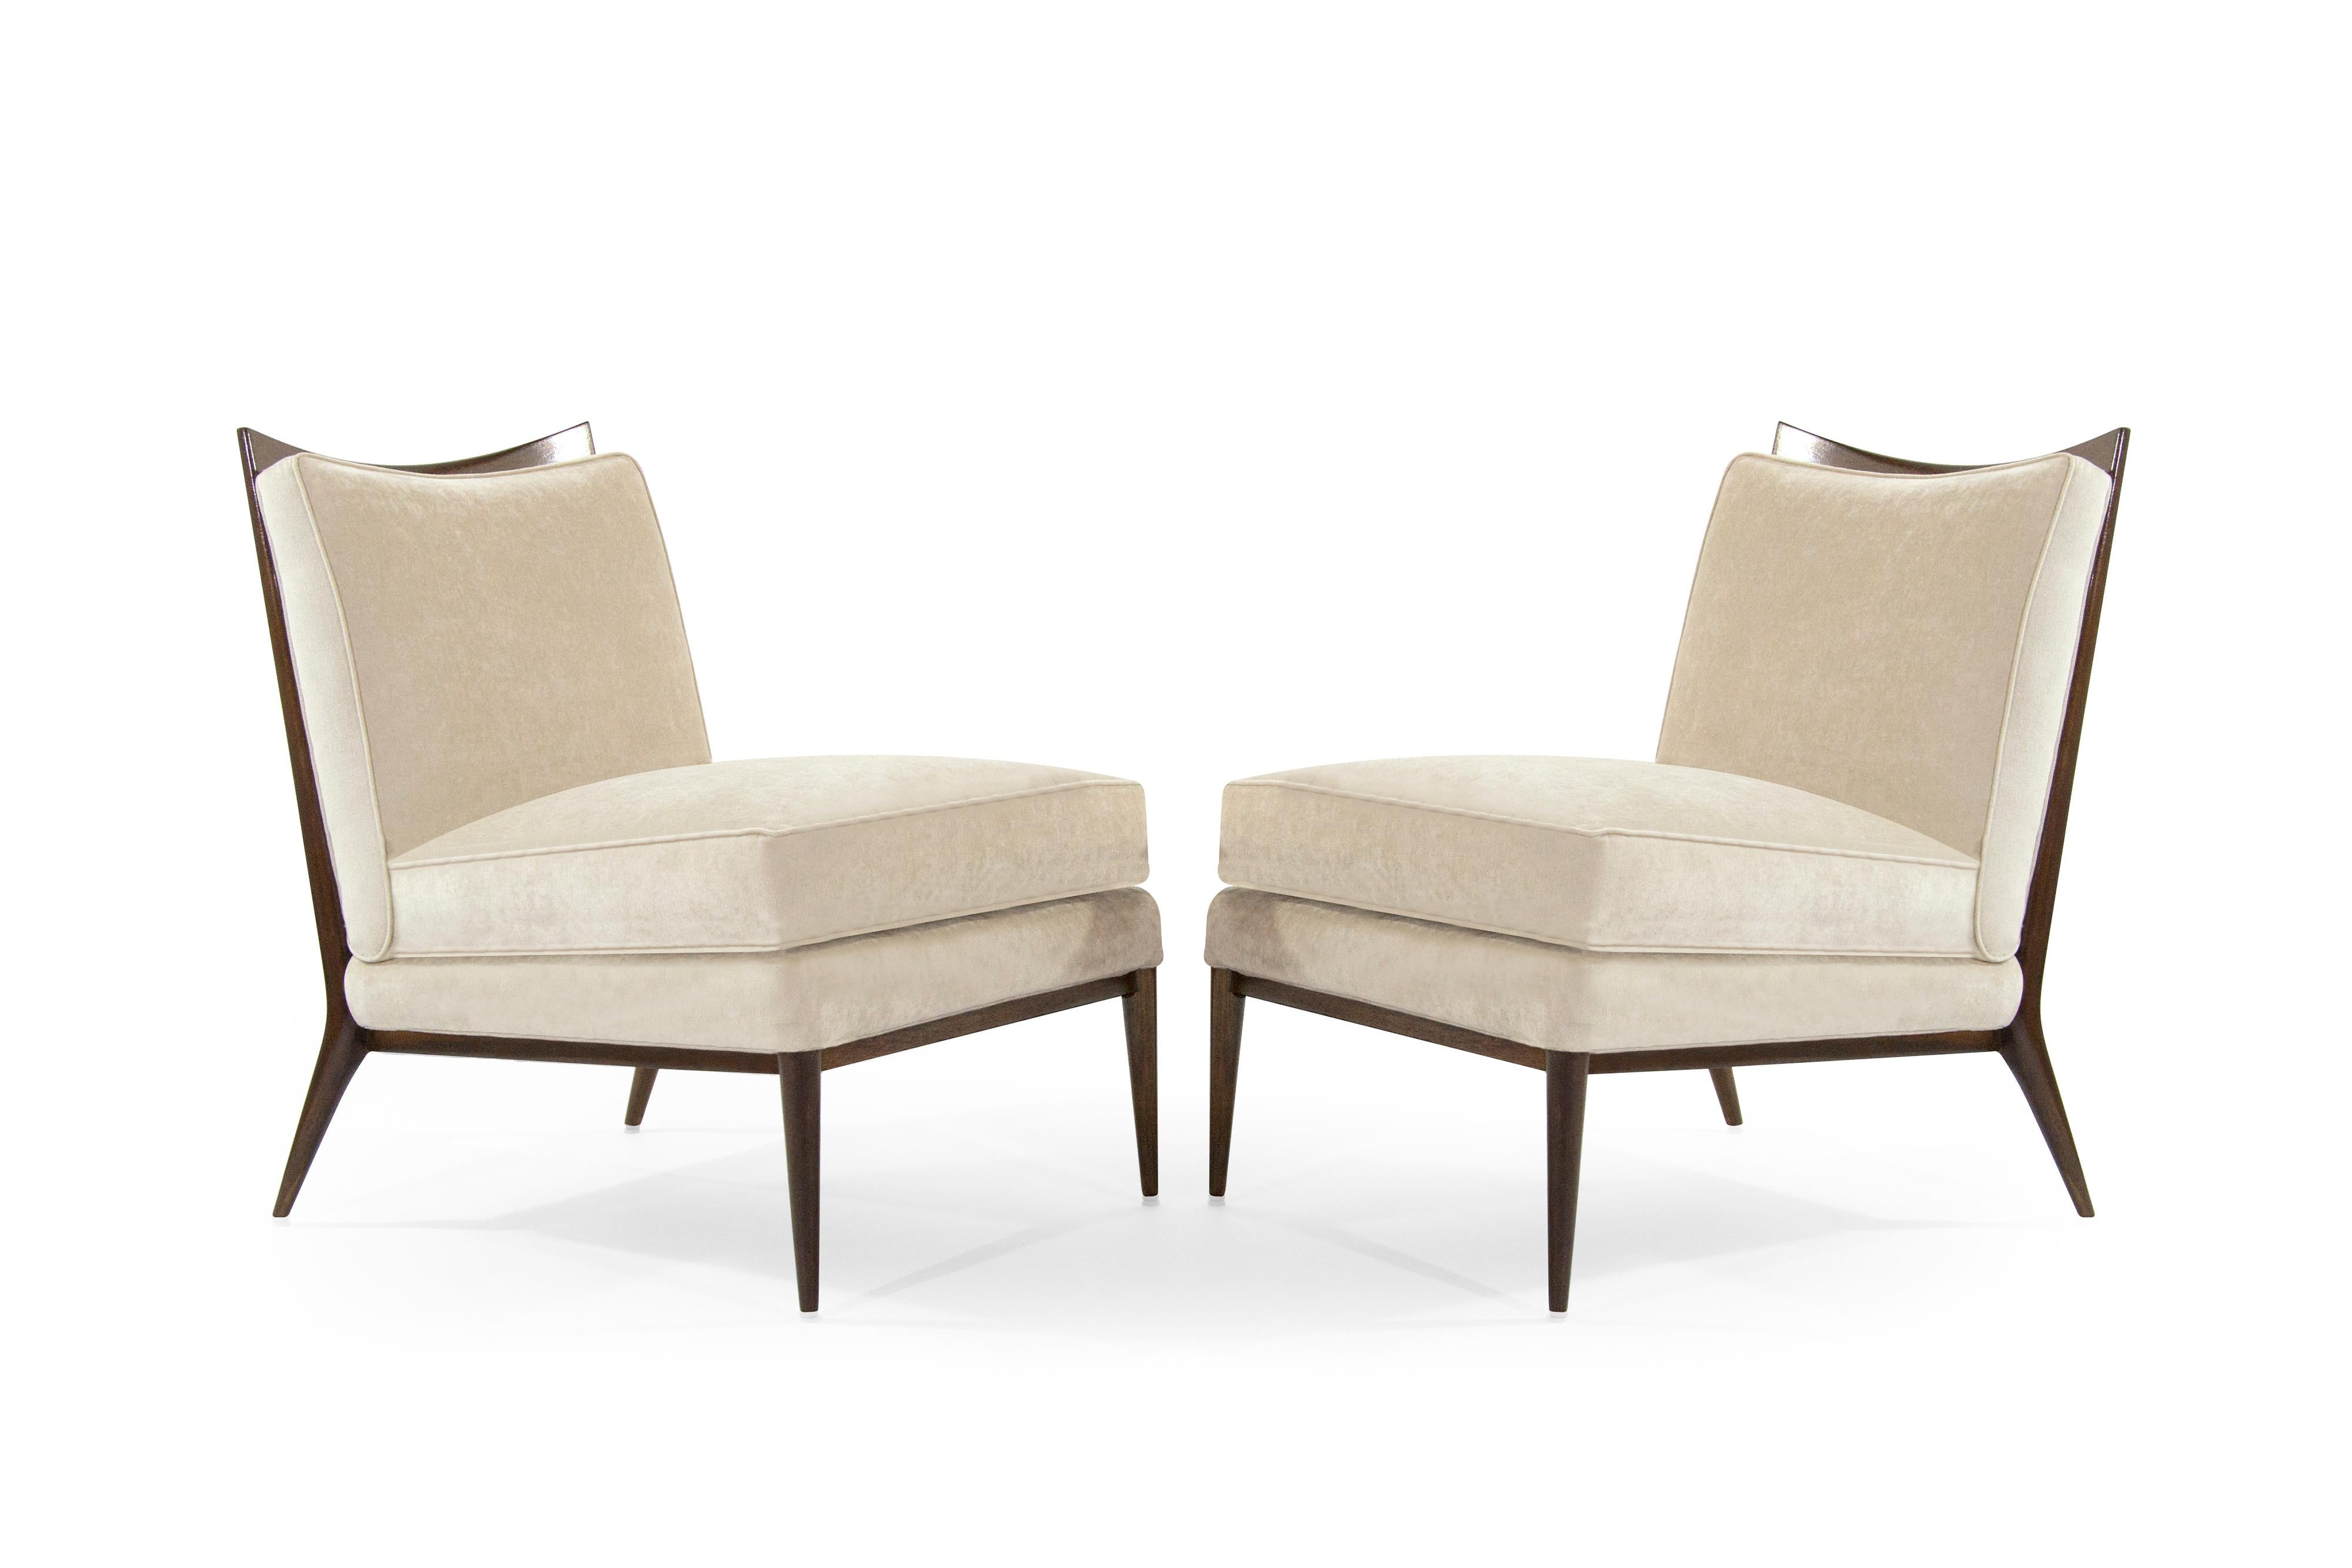 Exceptional pair of chairs designed by Paul McCobb for Directional, circa 1950s.

Newly upholstered in taupe velvet, walnut framed fully restored.